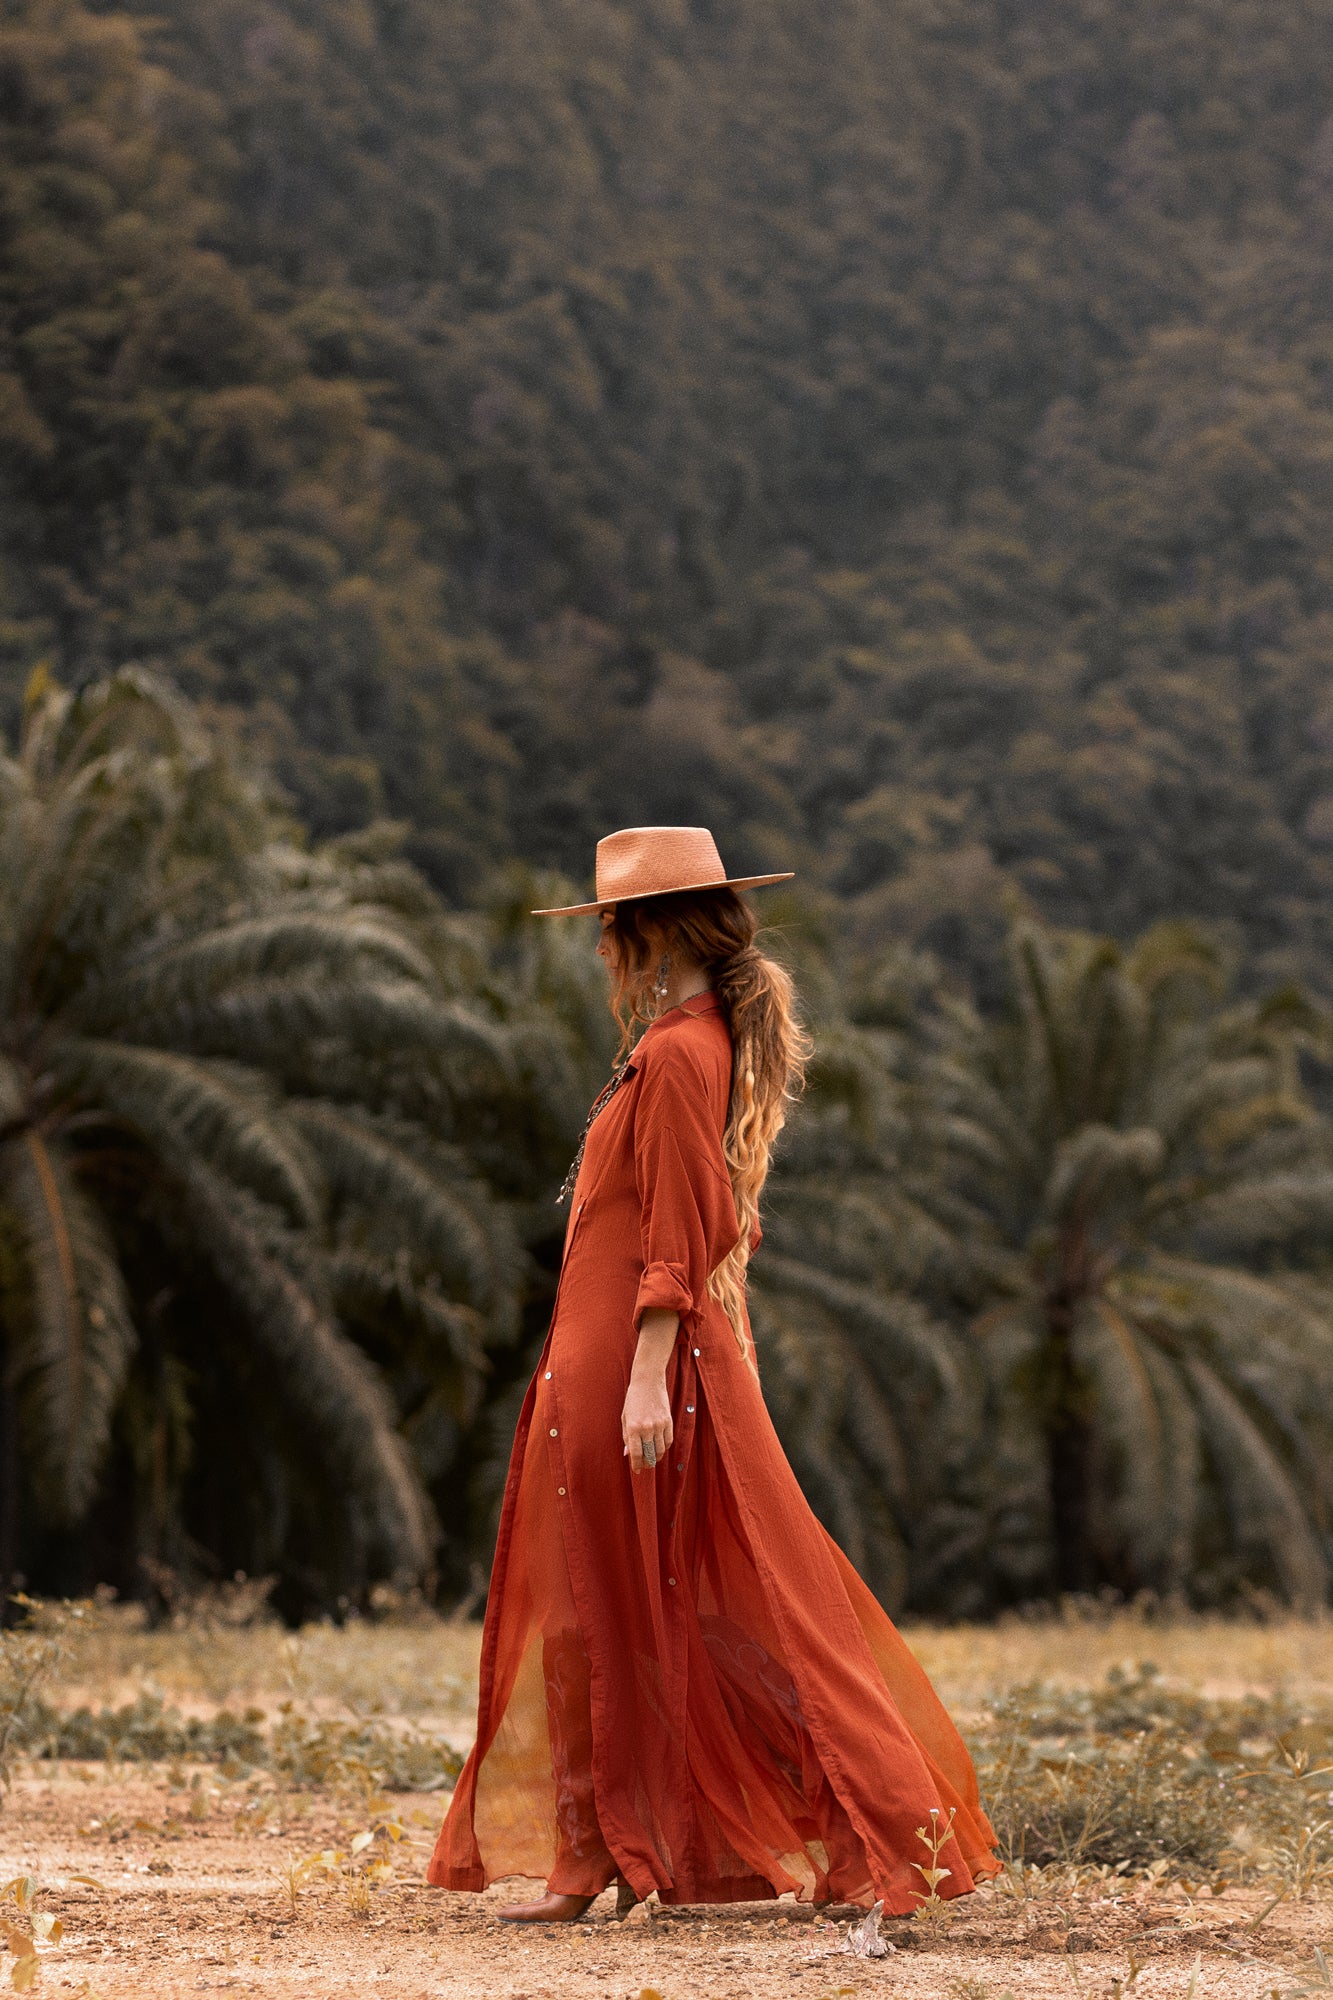 Dress with Purpose: Handcrafted Bohemian Popover – Red Kannika Shirt Dress, a unique blend of silk chiffon and crinkle cotton with adjustable buttons for personal styling